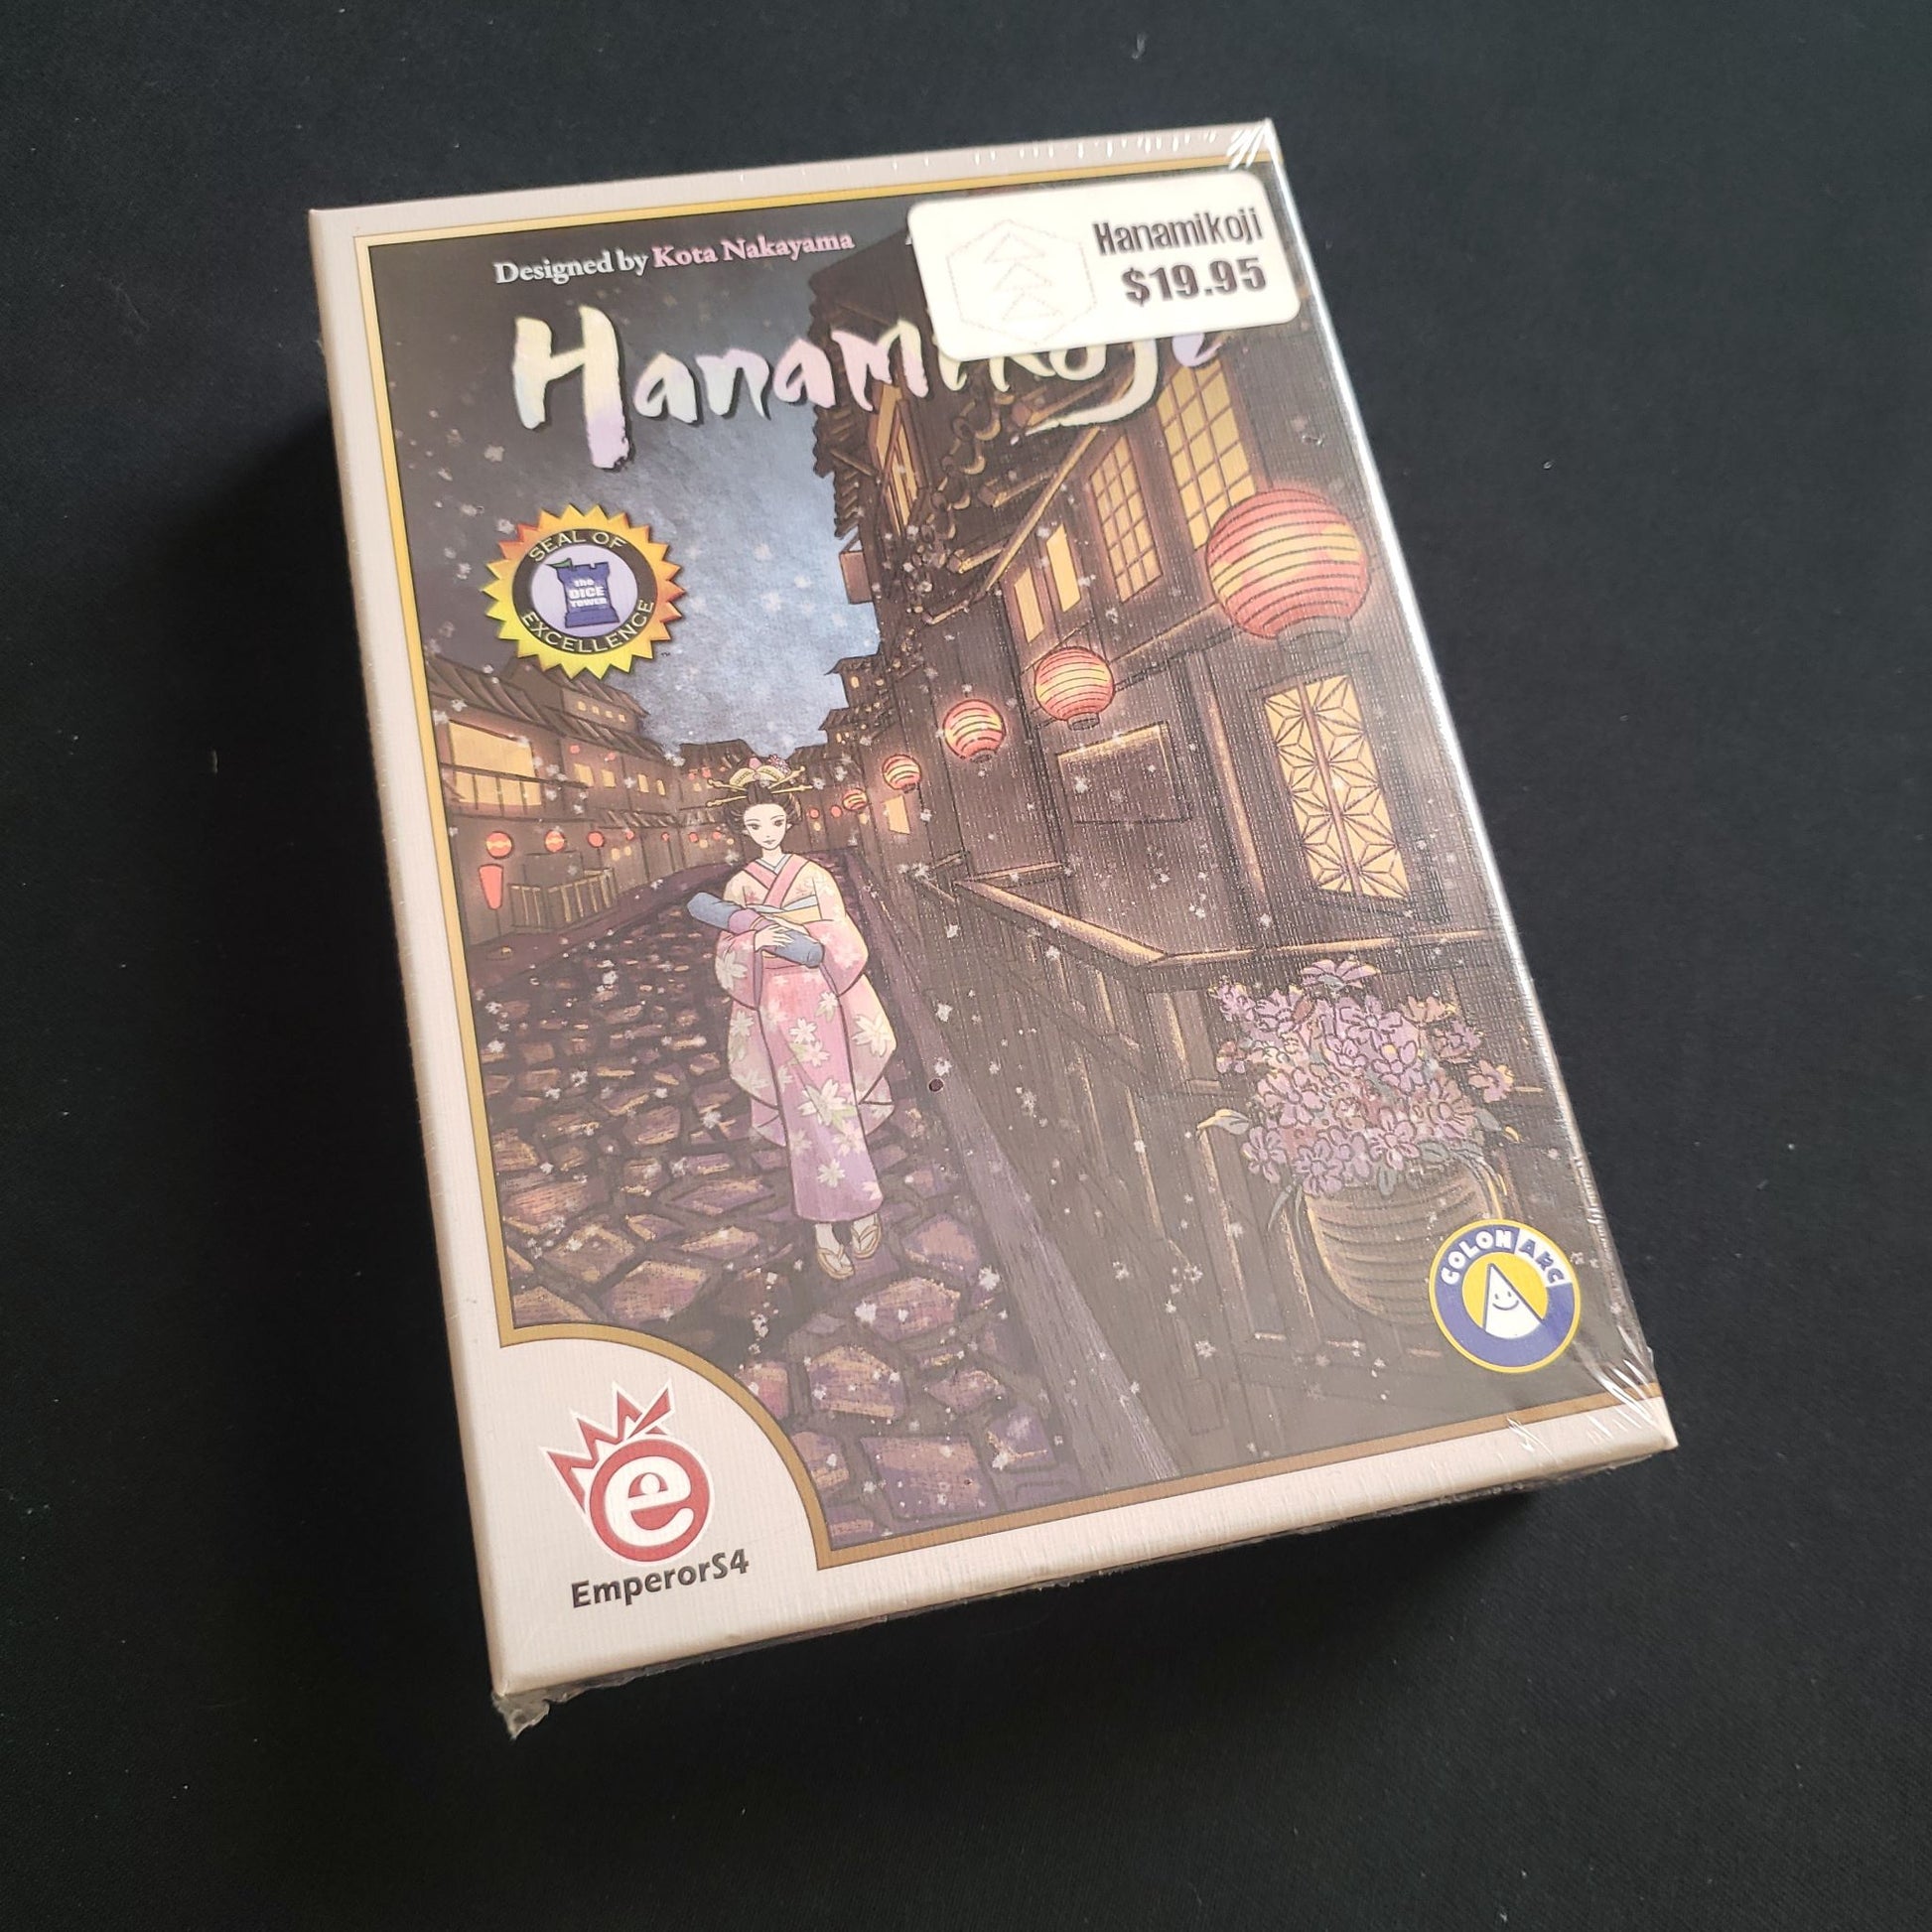 Hanamikoji card game - front cover of box